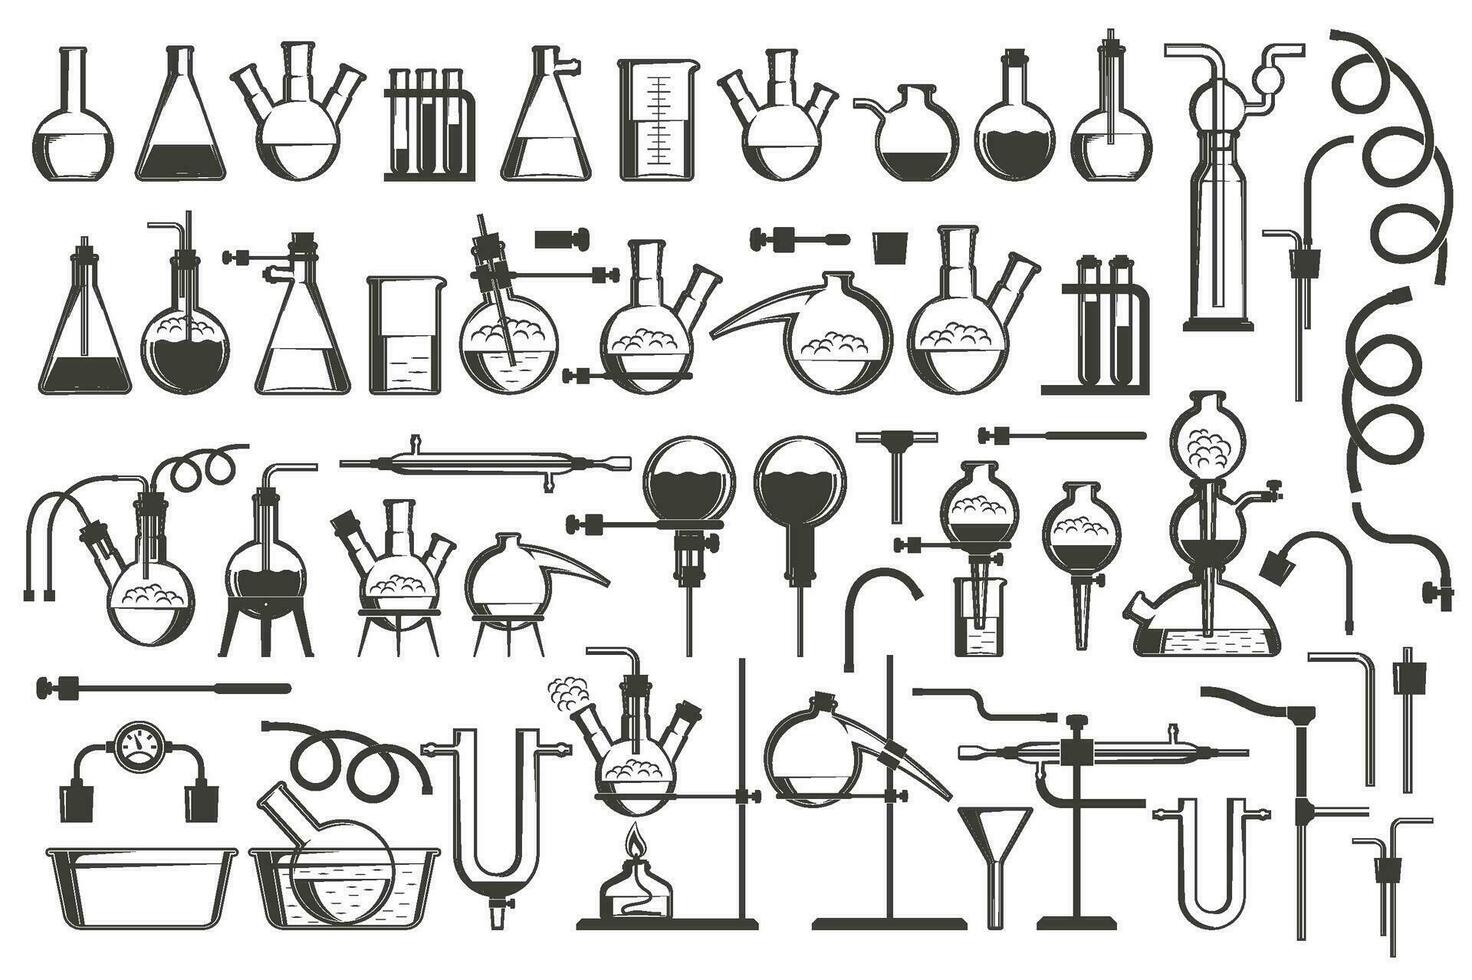 Chemical science design elements great set - equipment, flasks, retorts, containers, racks, hoses and so on. vector